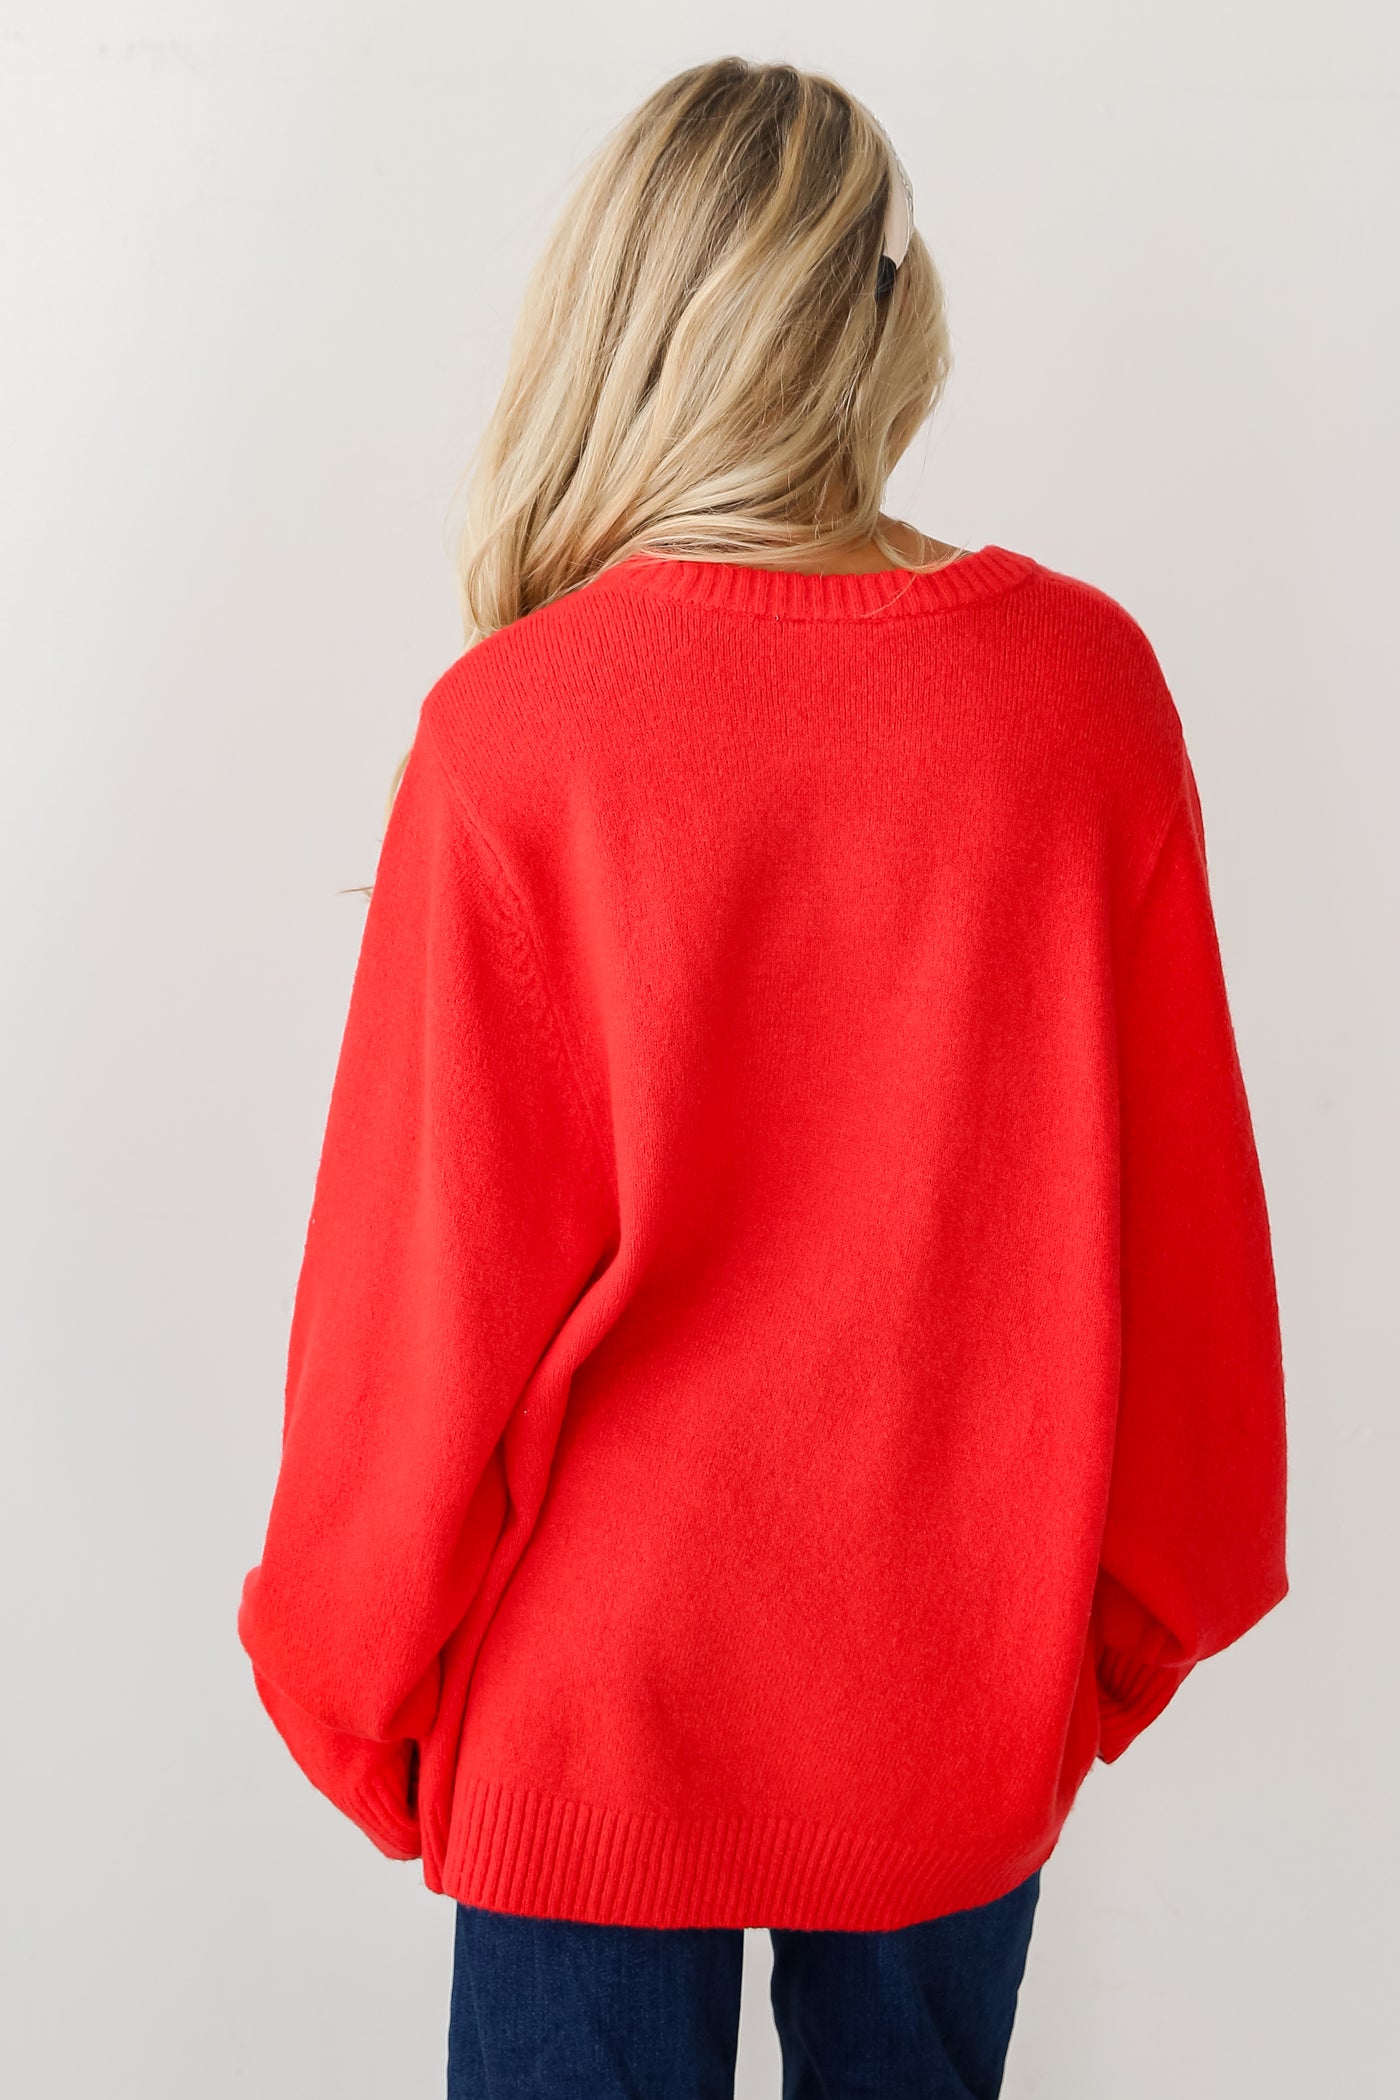 red Oversized Sweater back view